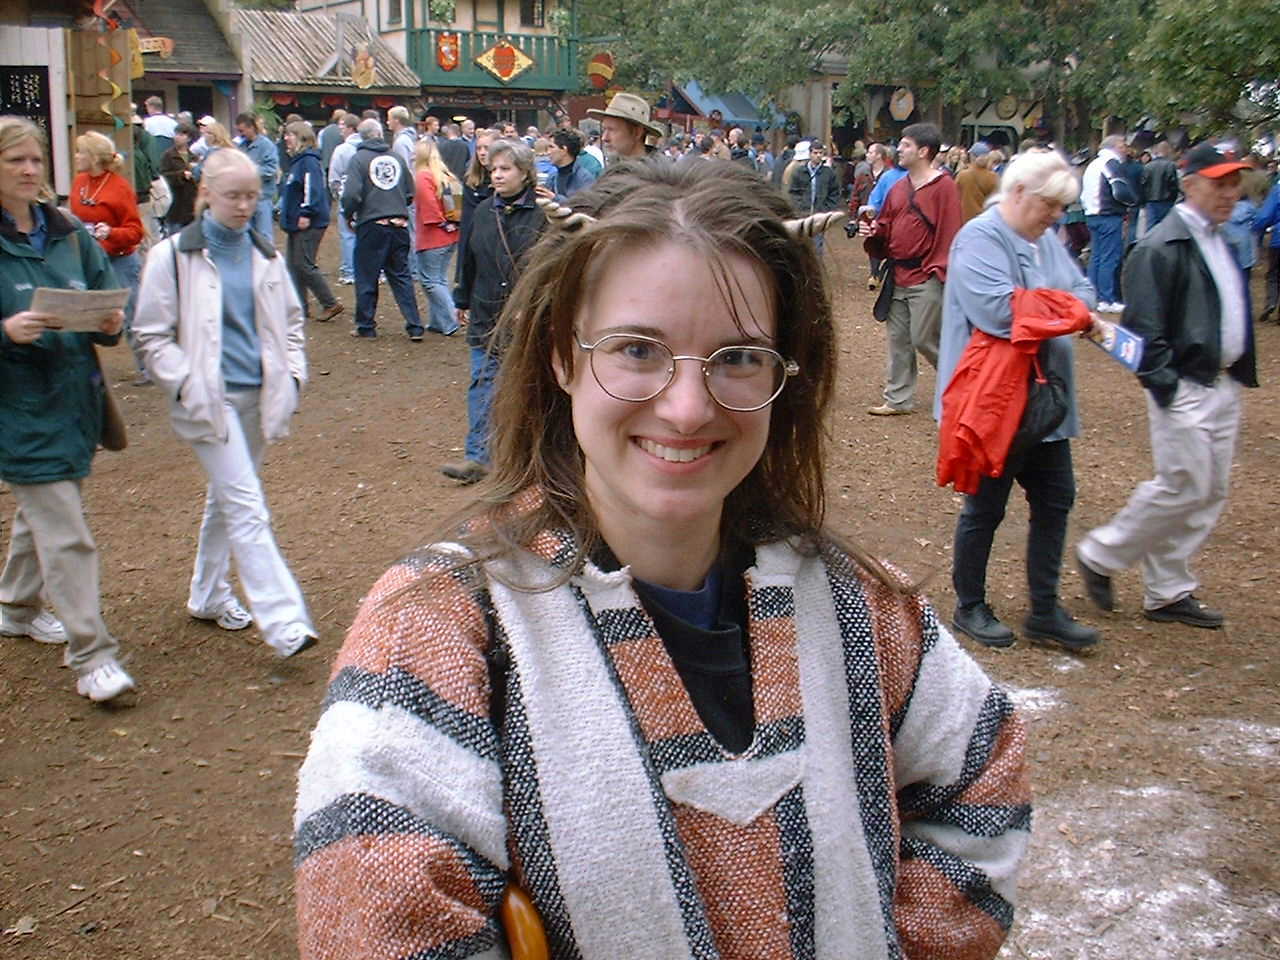 Me and my new
horns.  RenFest3 is larger version